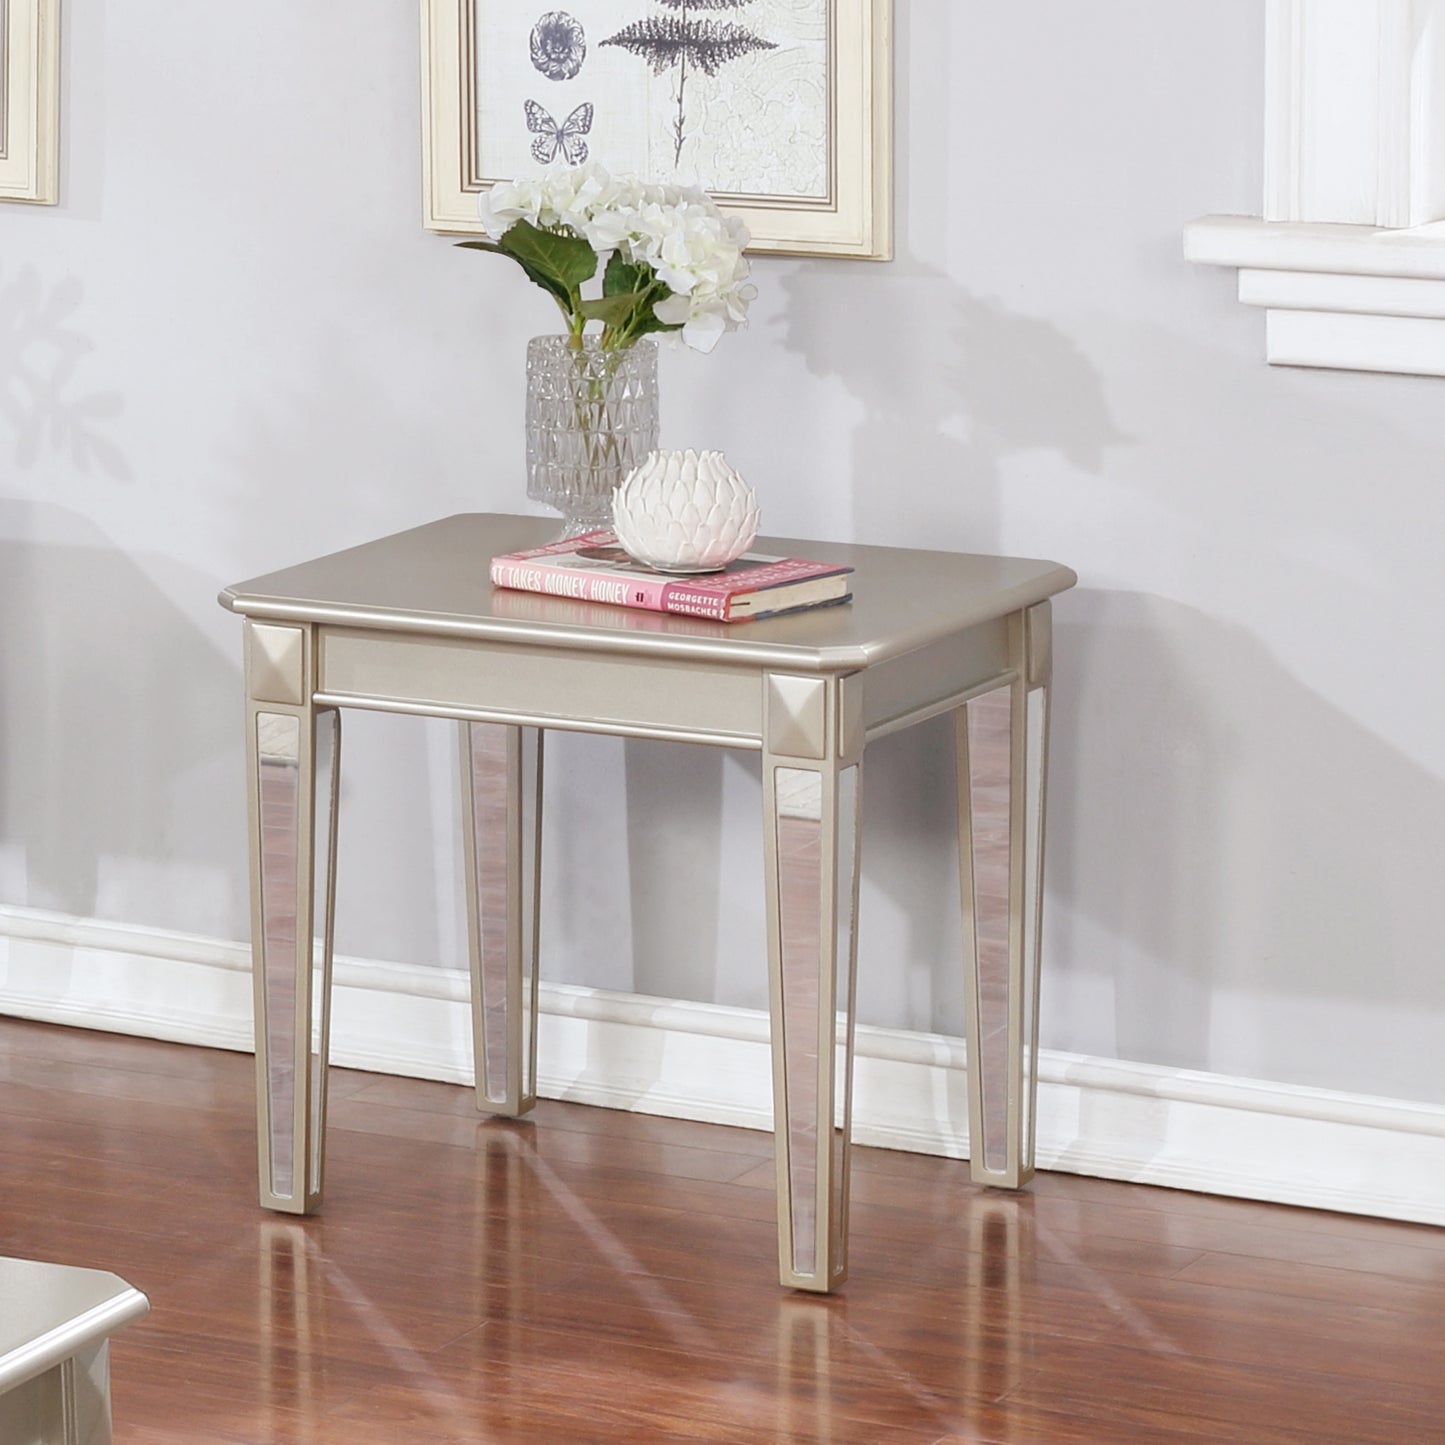 Barent Contemporary Wood End Table with Mirrored Legs, Champagne